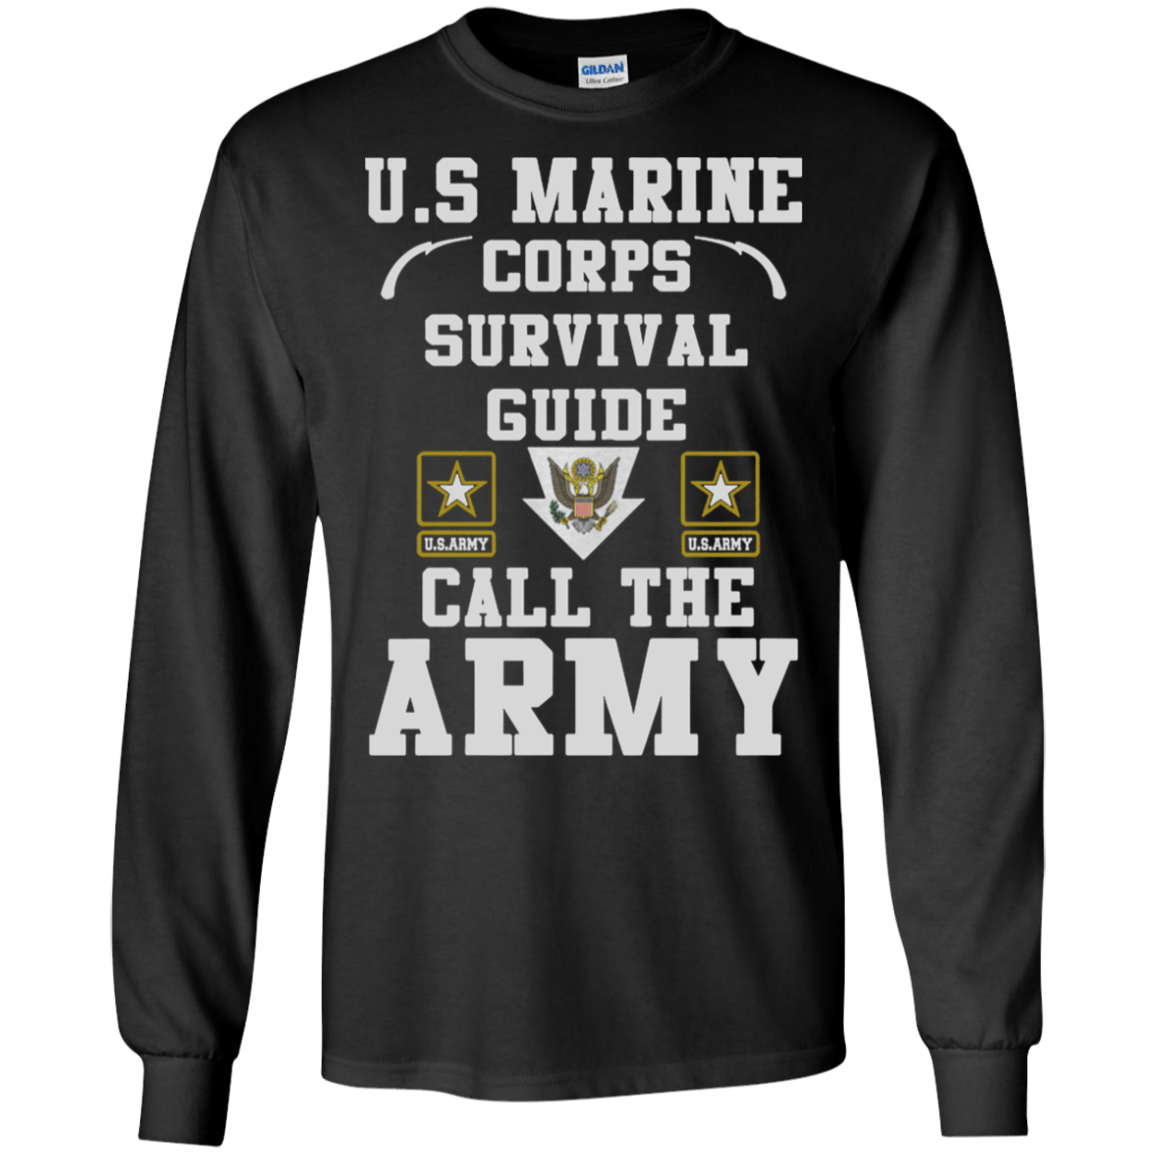 US Marine corps survival guide US Army call the Army shirt Ultra Cotton Shirt